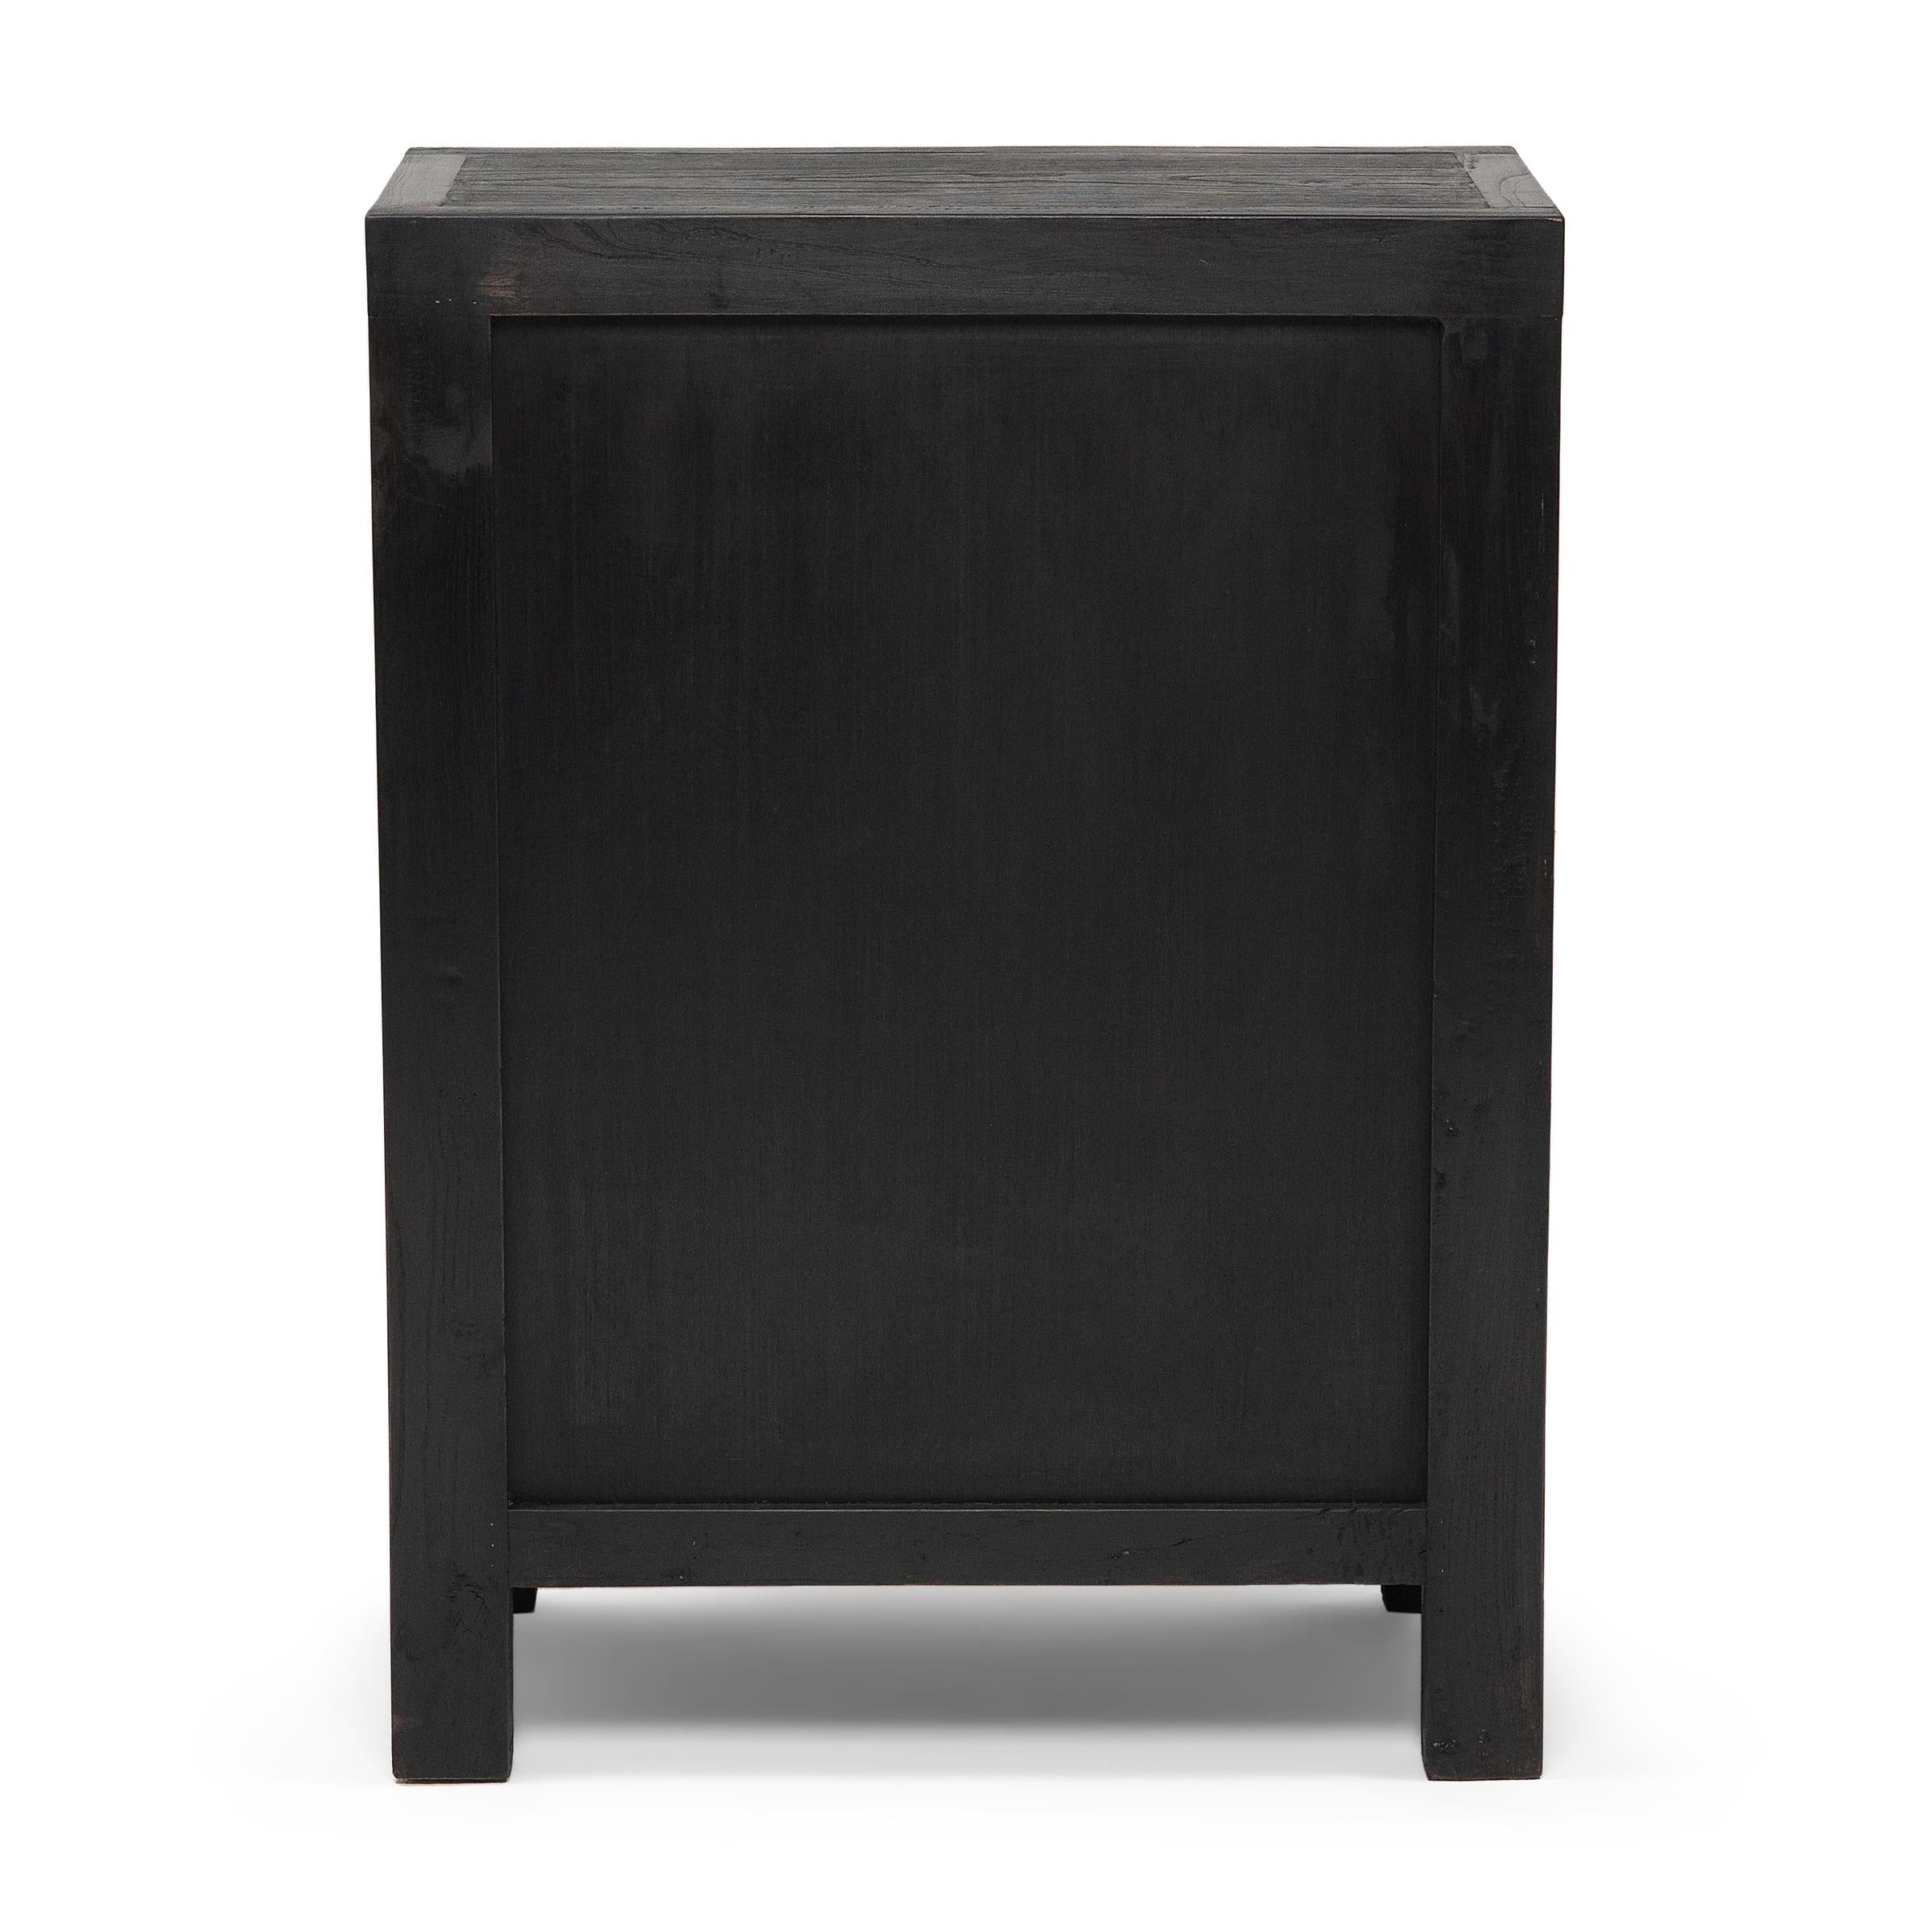 Chinese Export Chinese Square Corner Locking Cabinet For Sale